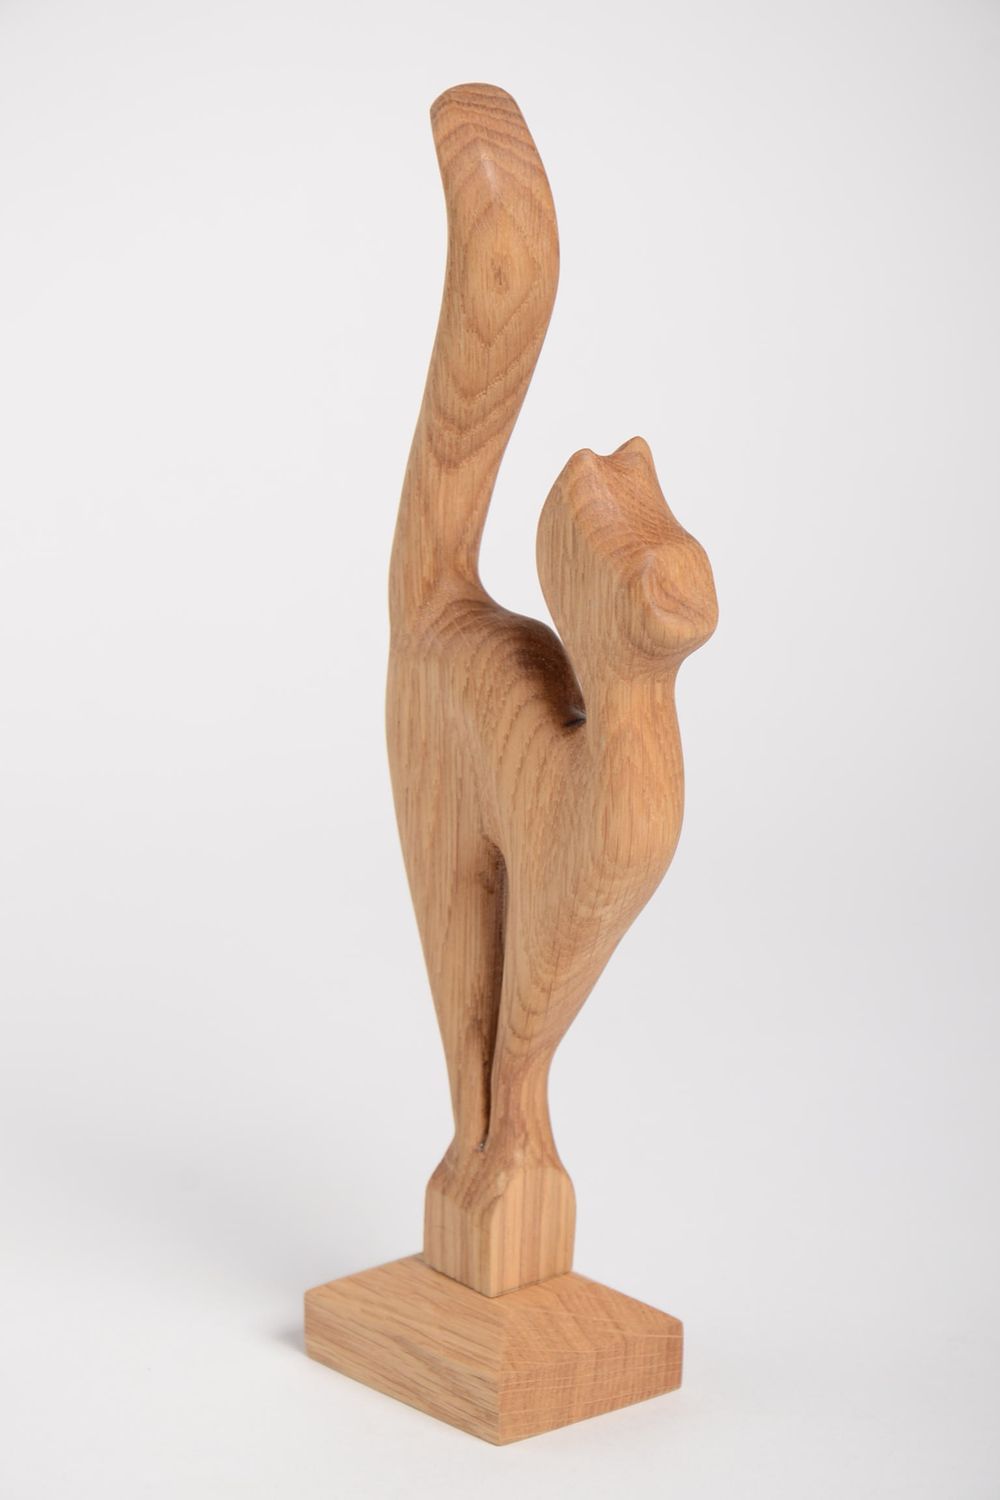 Homemade home decor wood sculpture wooden gifts cat figurines for decorative use photo 4